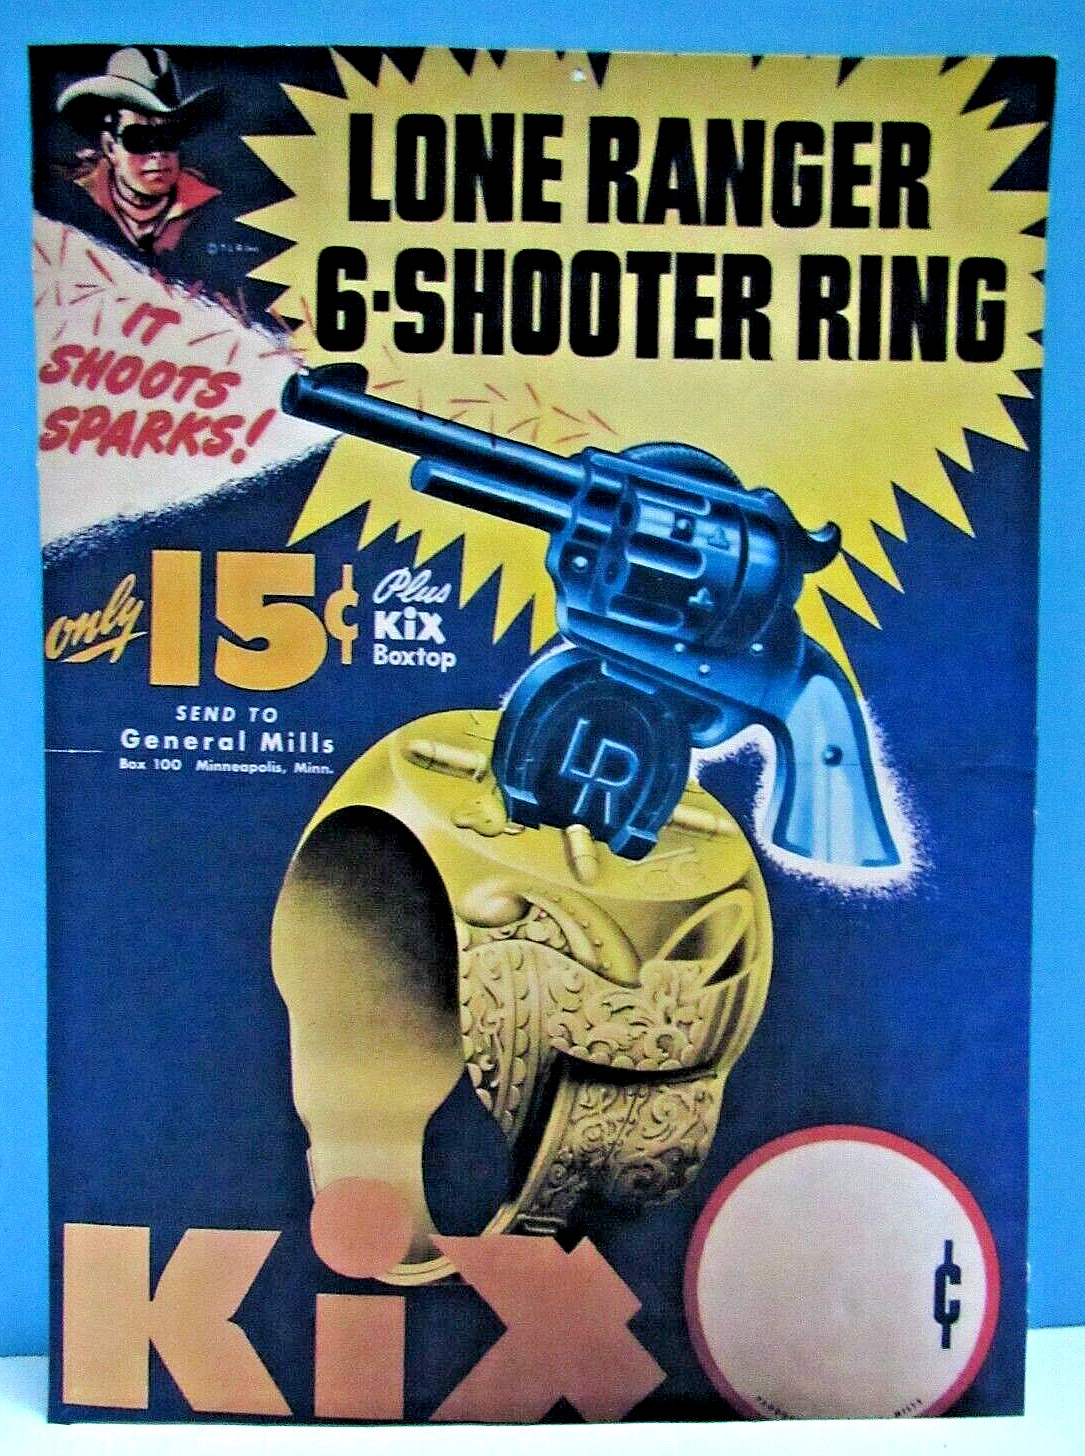 LONE RANGER 6-SHOOTER RING RETRO AD BY GENERAL MILLS ON HEAVY CARDBOARD BACKING